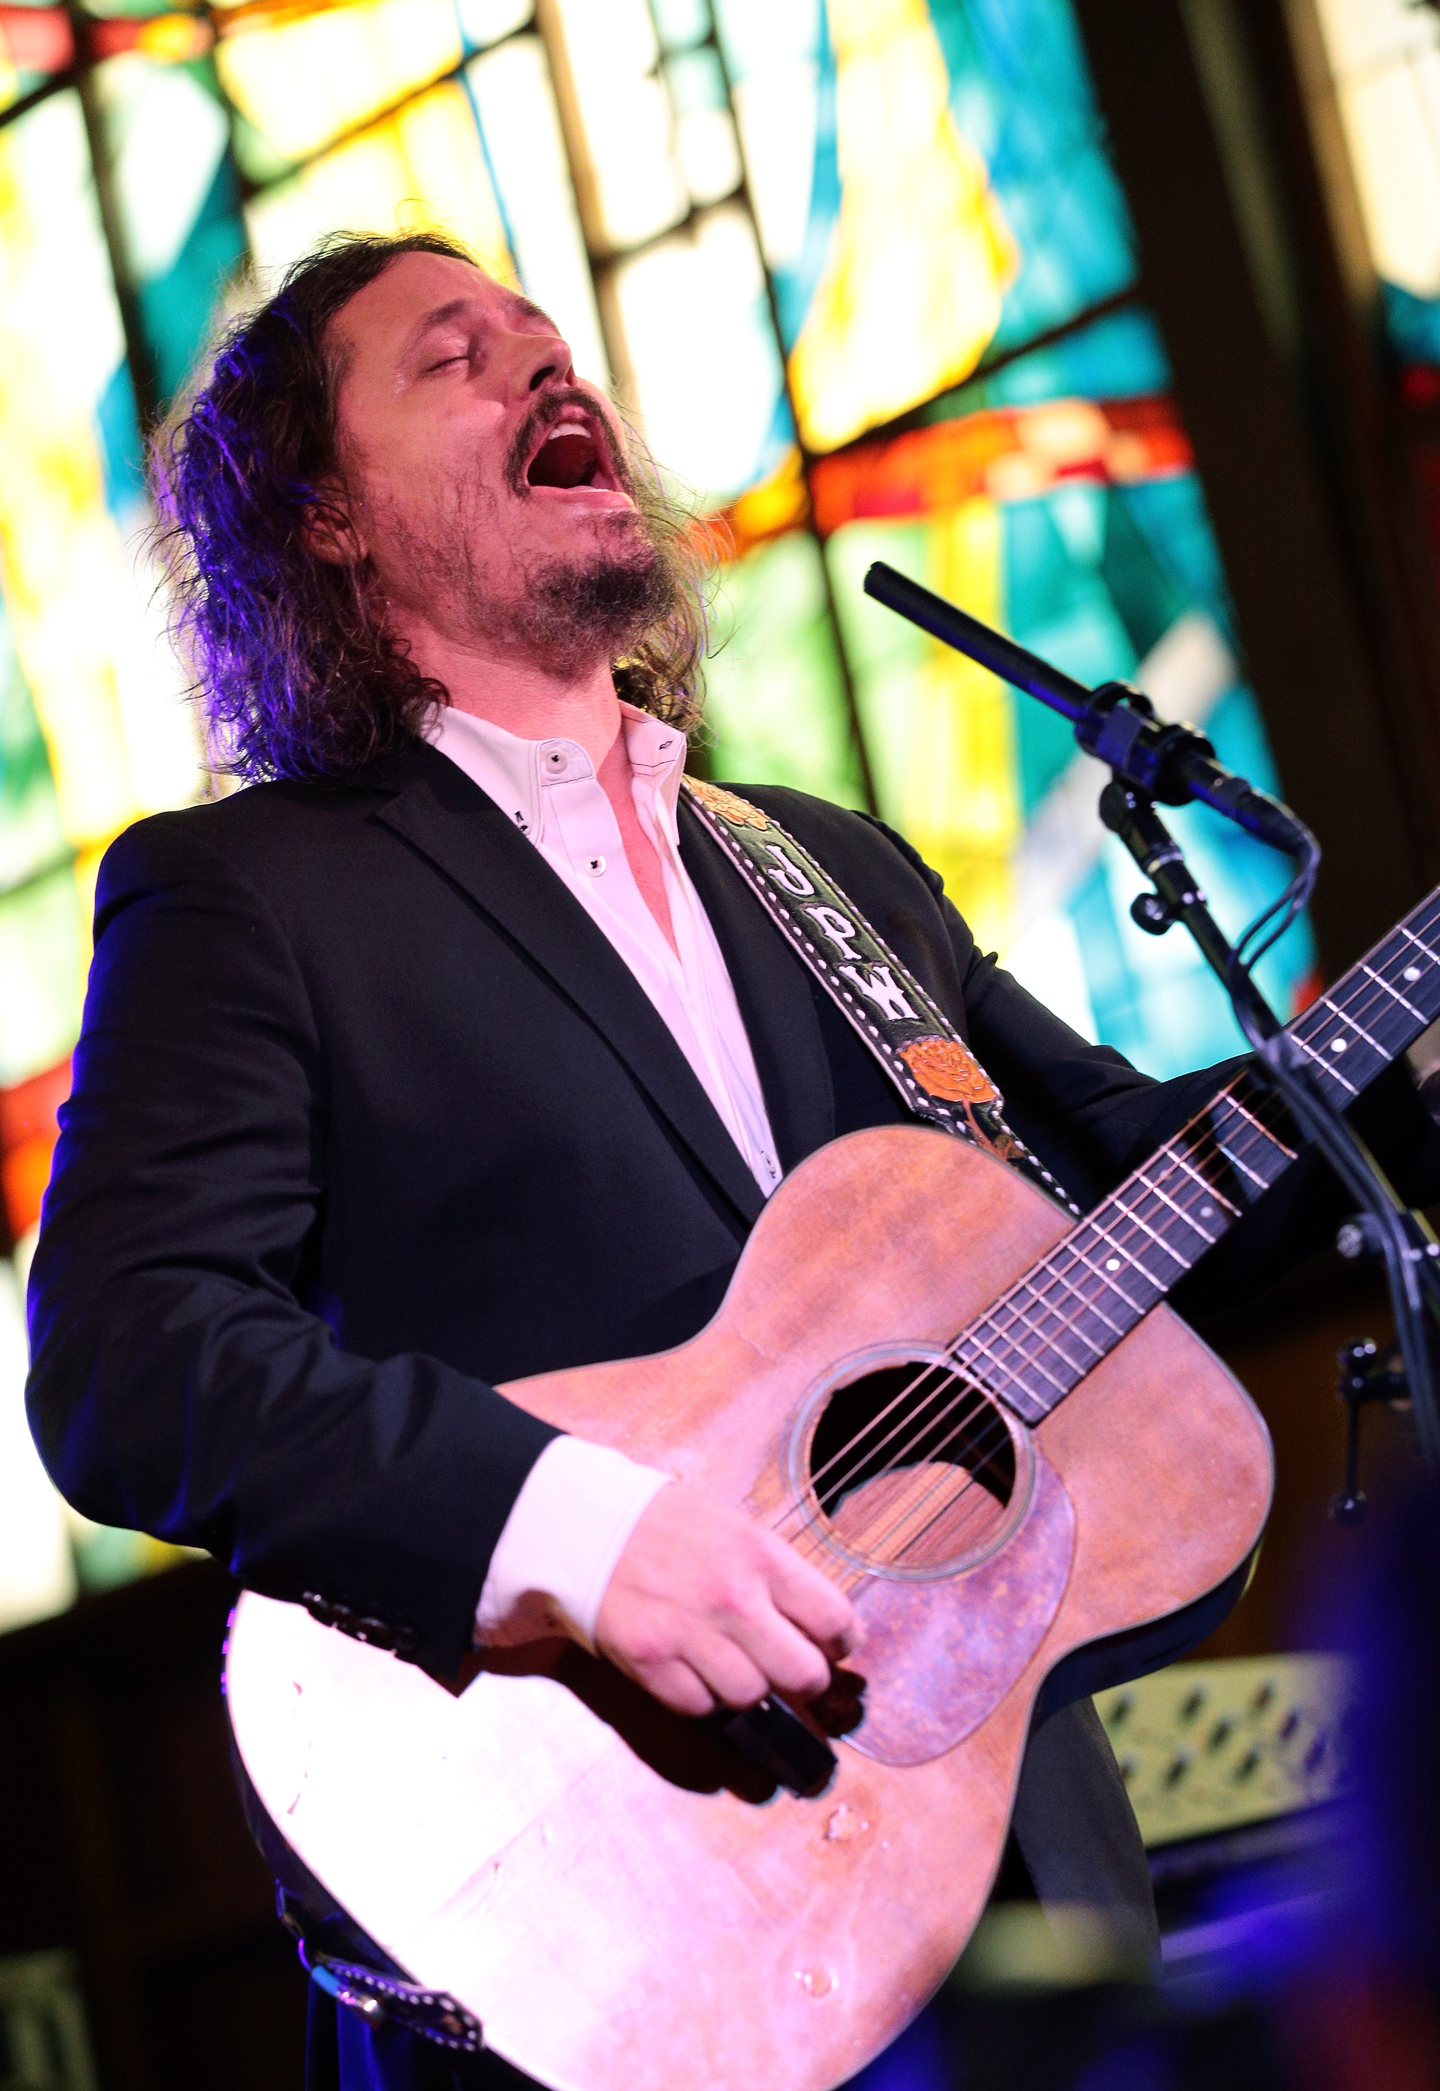 John Paul White performs onstage at NPR Tiny Desk Concert at Central Presbyterian Church.